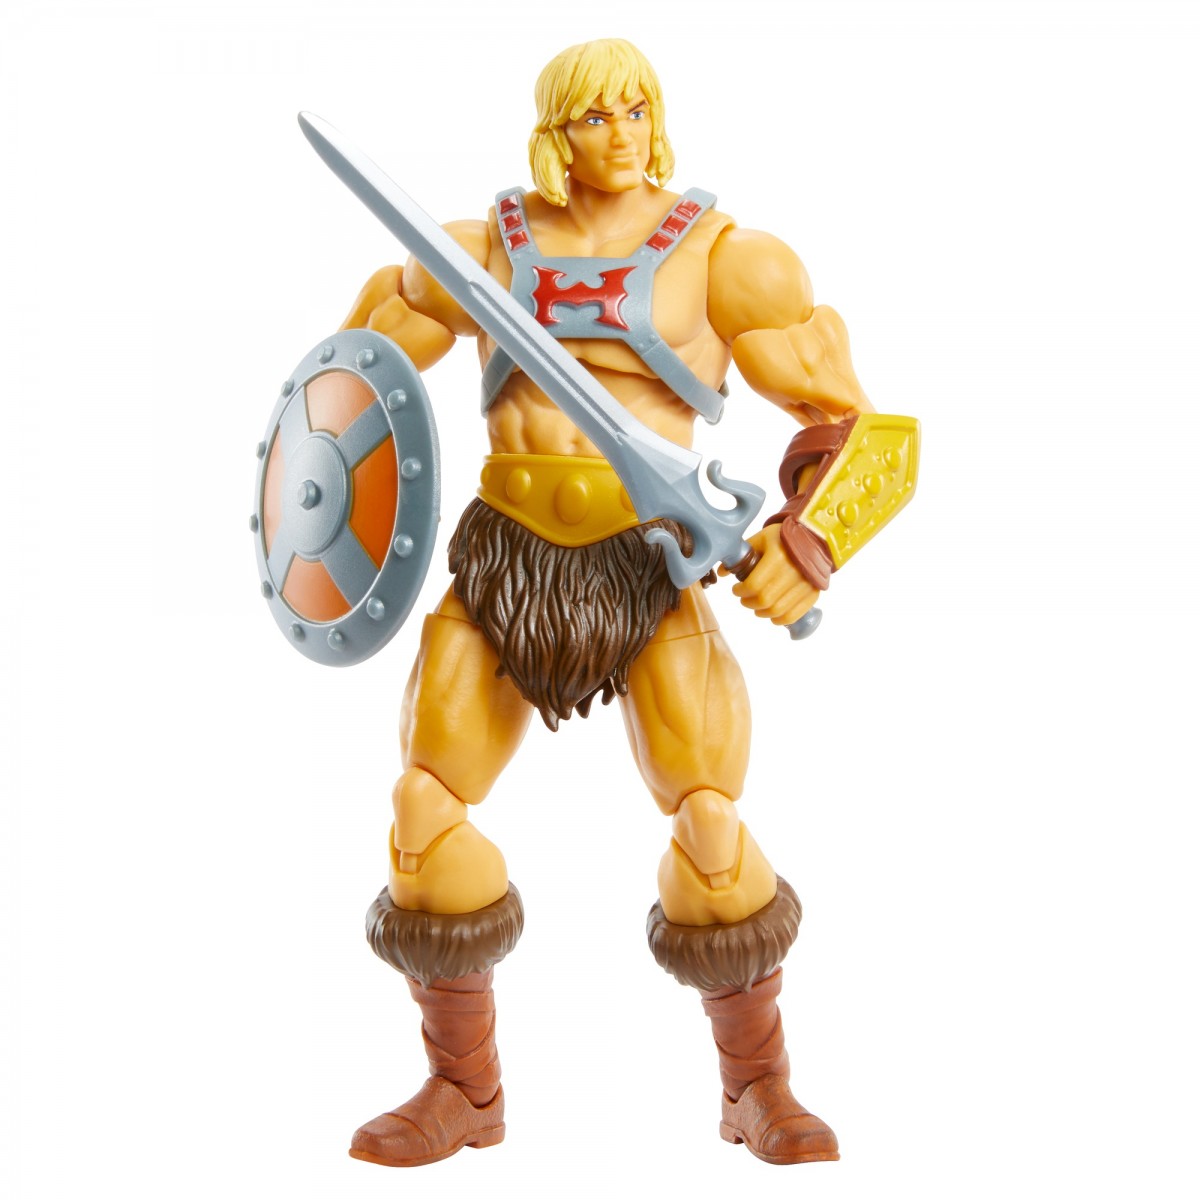 Motu Masters Of The Universe Masterverse Collection, 7-In Battle Figure - He-Man For Storytelling Play And Display, Gift For Kids Age 6 And Older And Adult Collectors, 6Y+ Multicolour